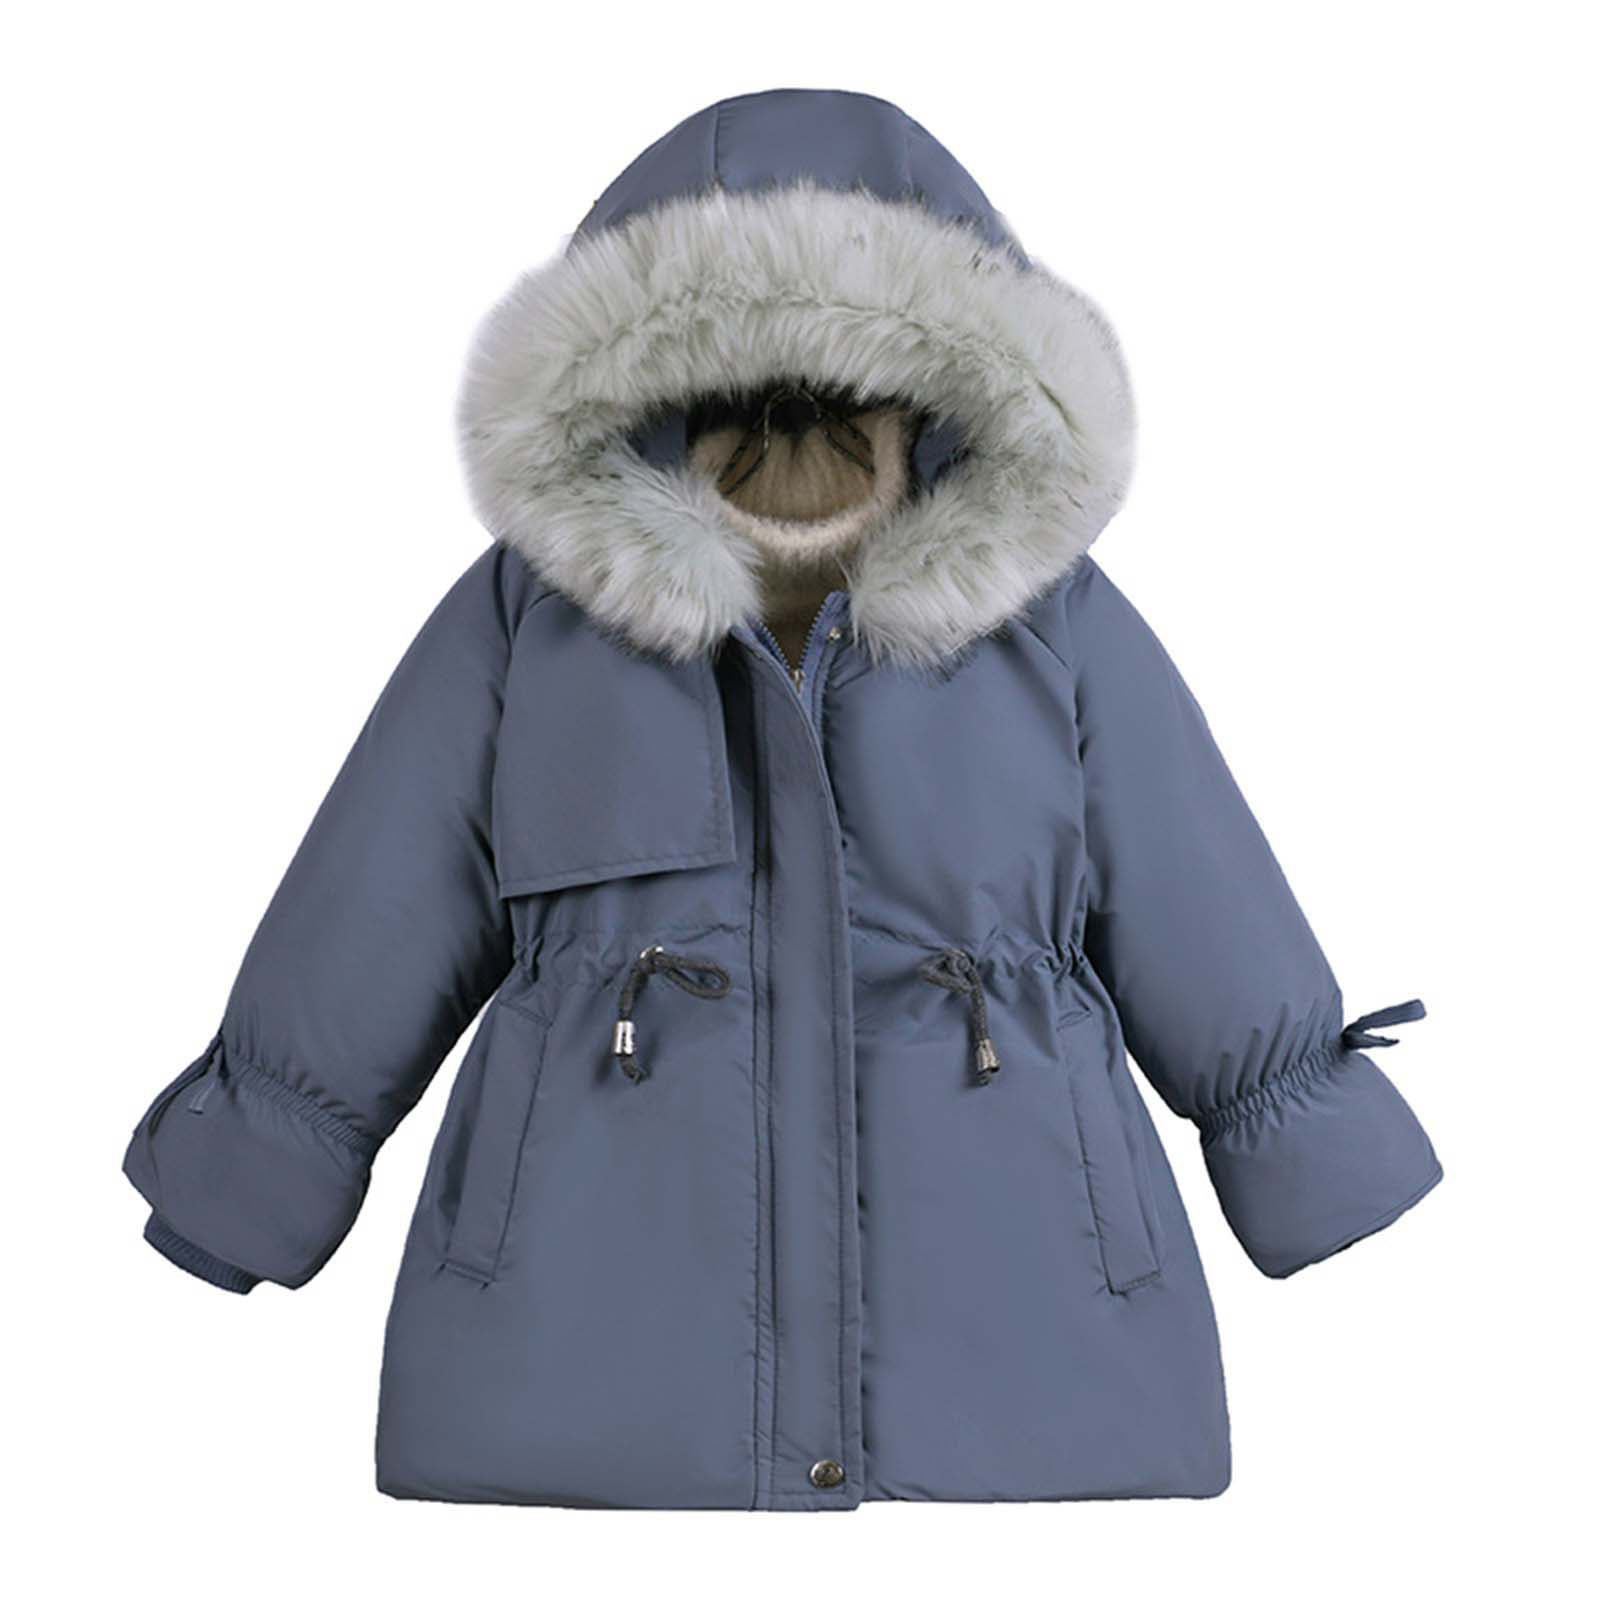 Children's Cotton Coat Girls Winter Slim Fit Warm Coats Puffer Coat Solid Color Thickened Hooded Fashion Casual Windproof Jacket Faux Fur Hood Parka Pocket Overcoat - image 2 of 8